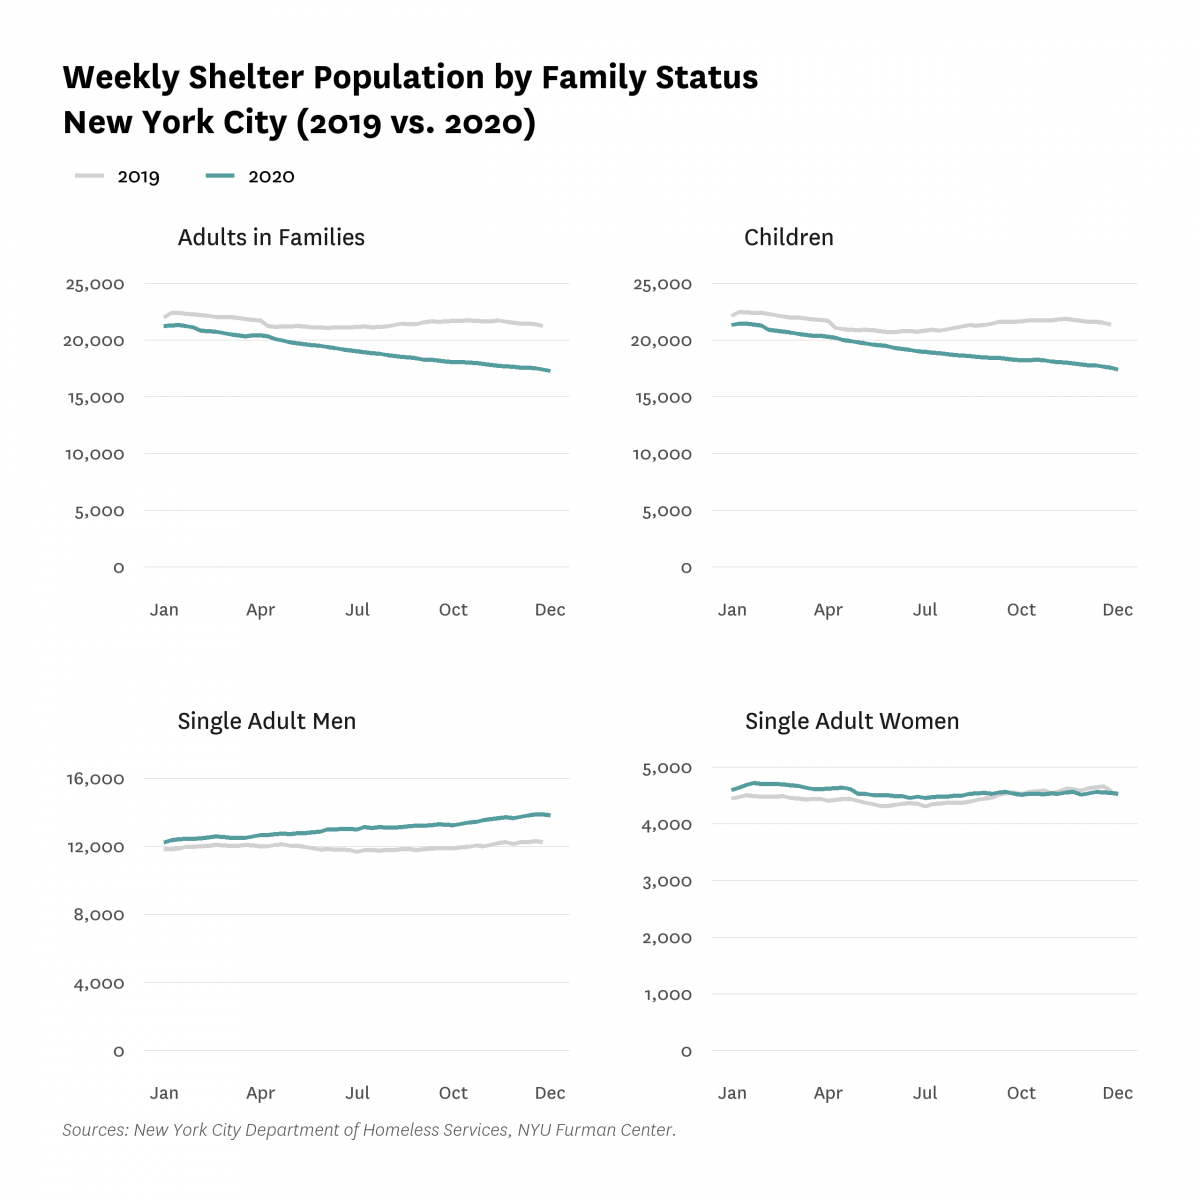 Line graphs comparing the weekly shelter population by family status in New York City in 2019 and 2020 for children, adults in families, single adult women, and single adult men.